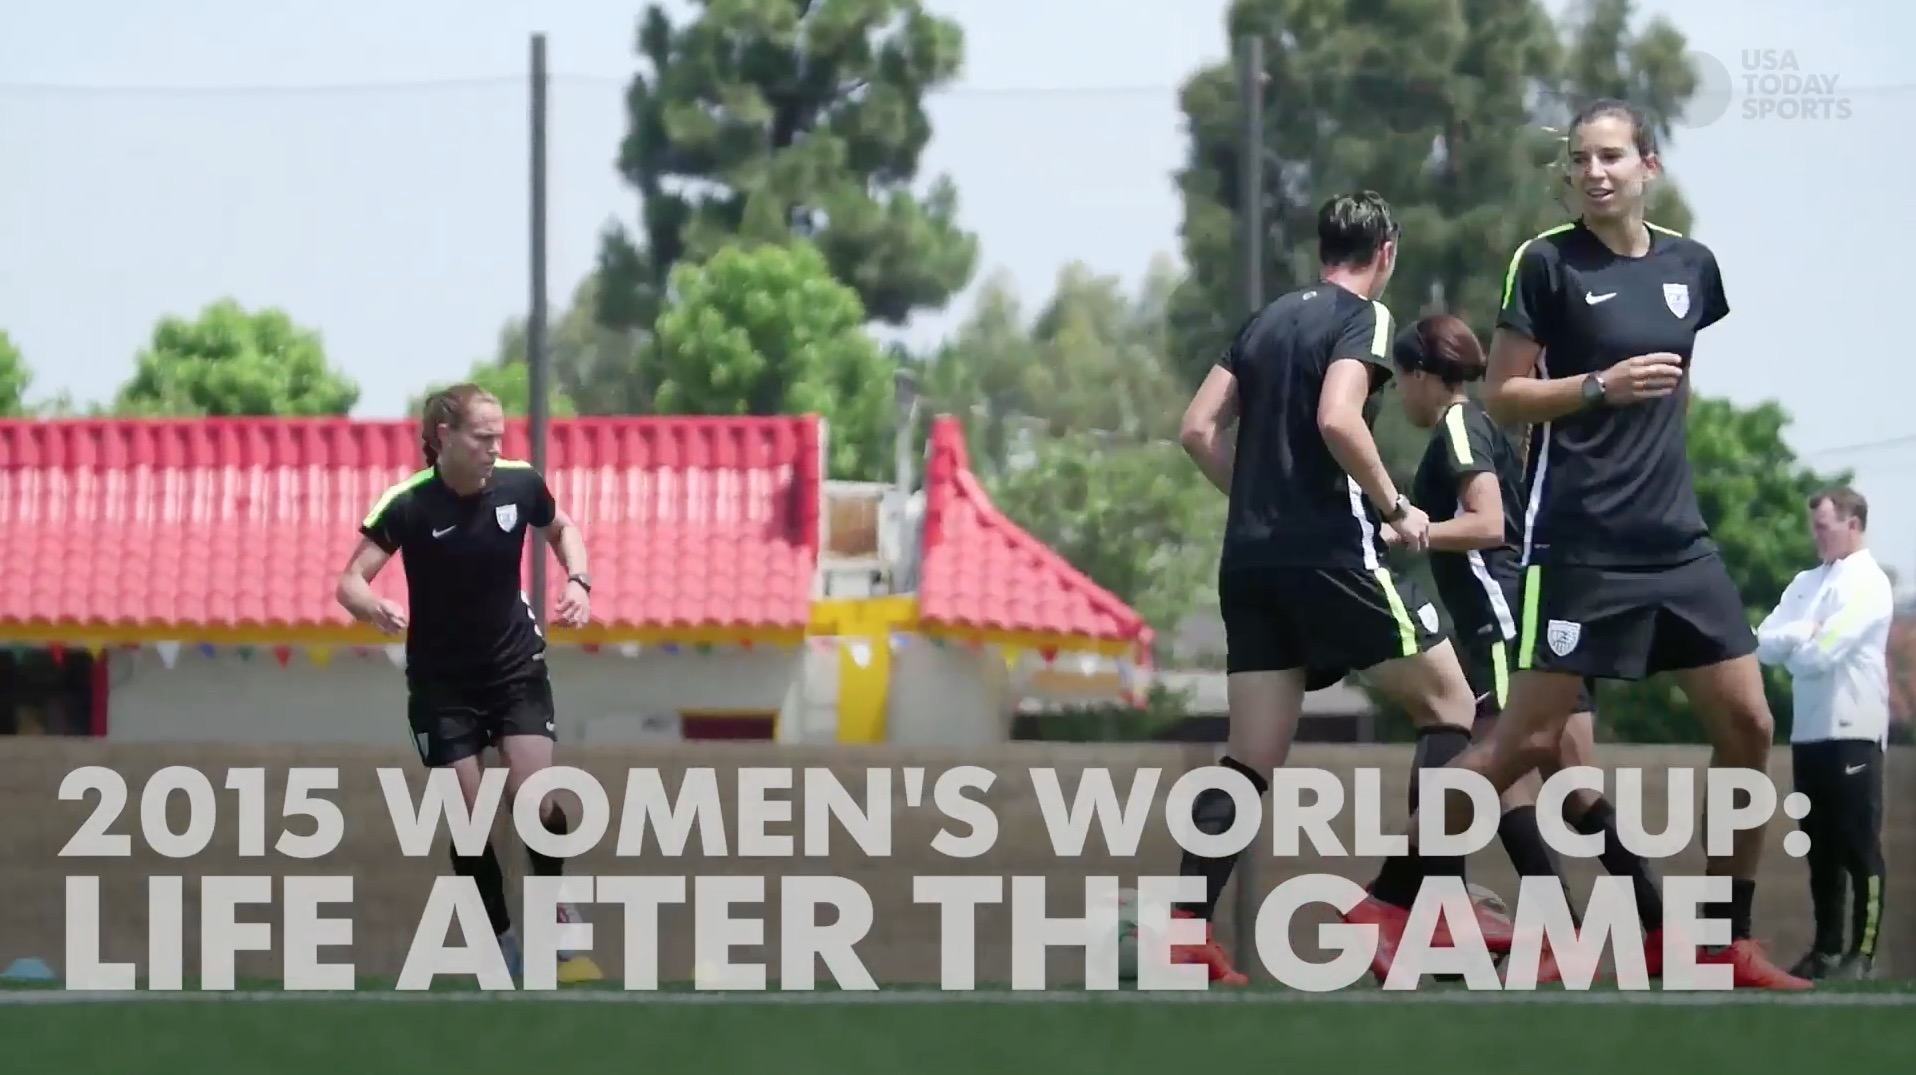 Life after the game: U.S. women's soccer